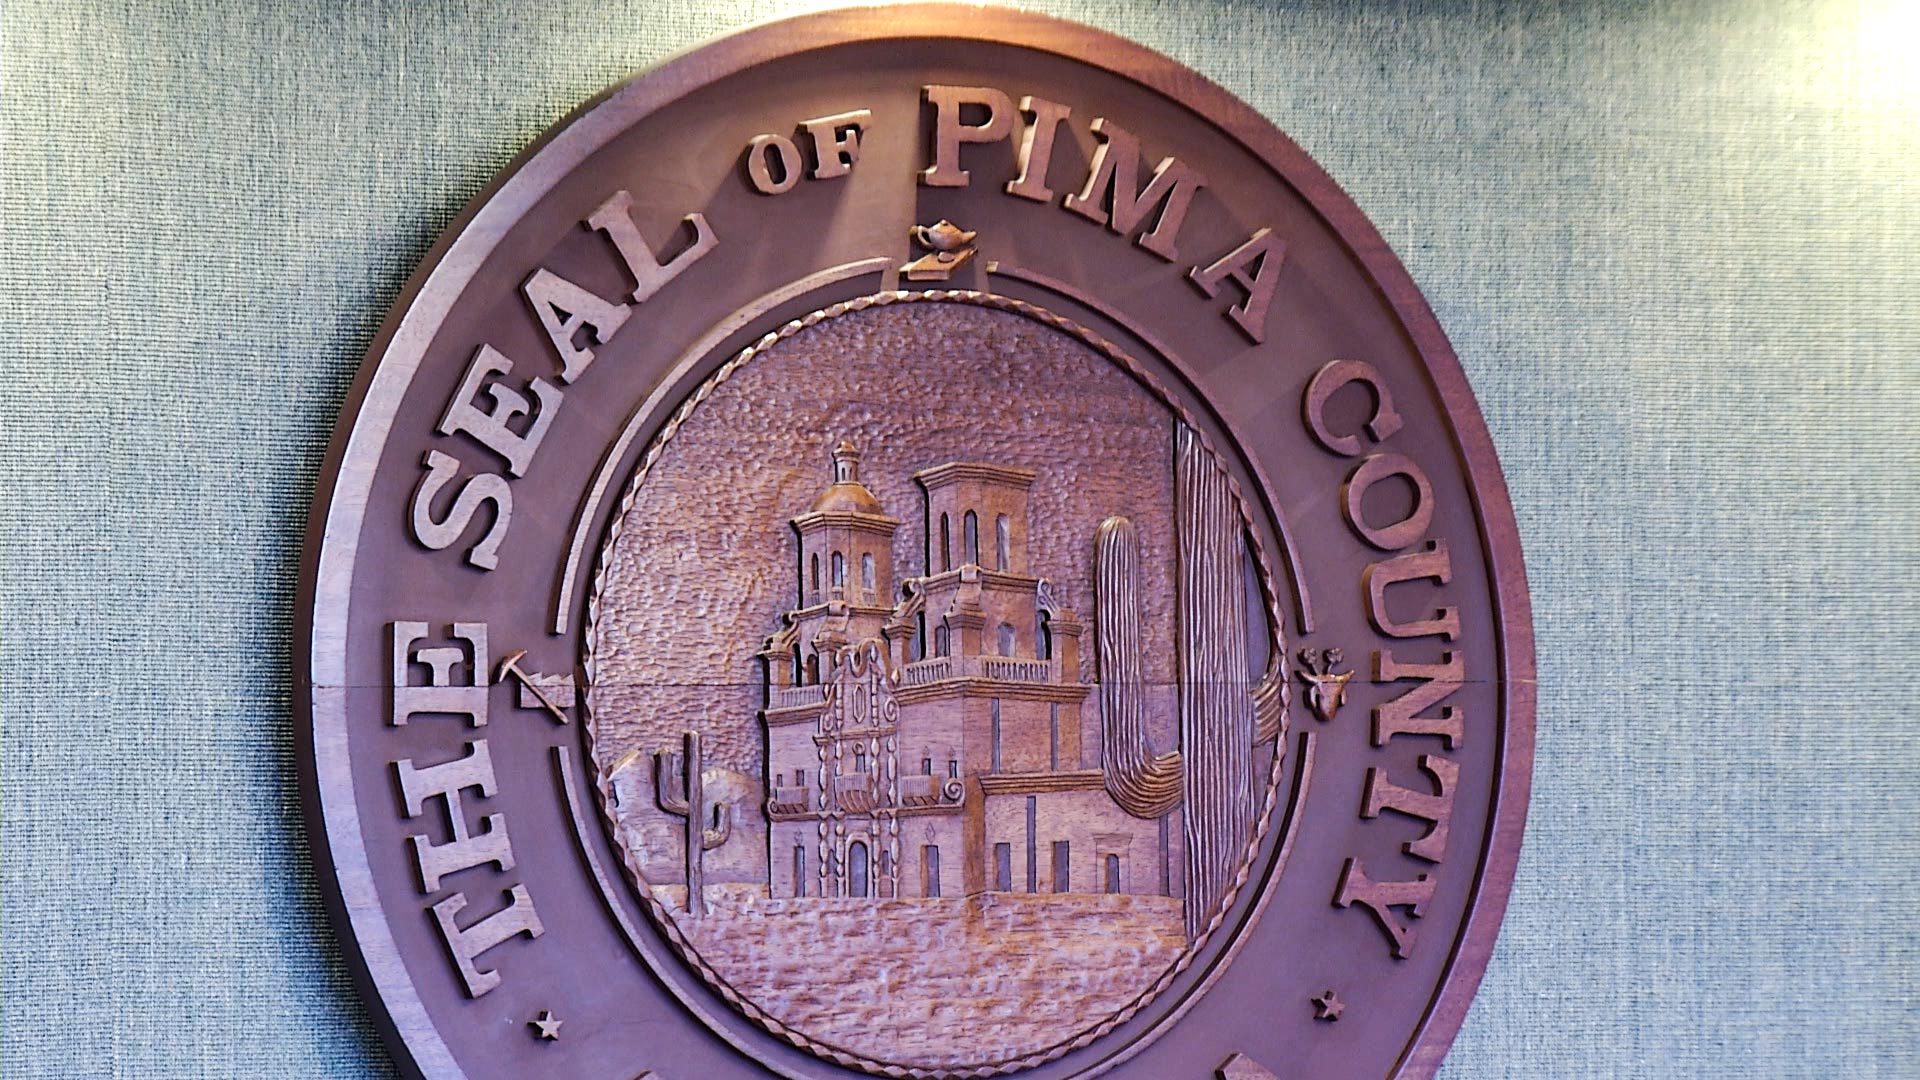 The seal of Pima County.